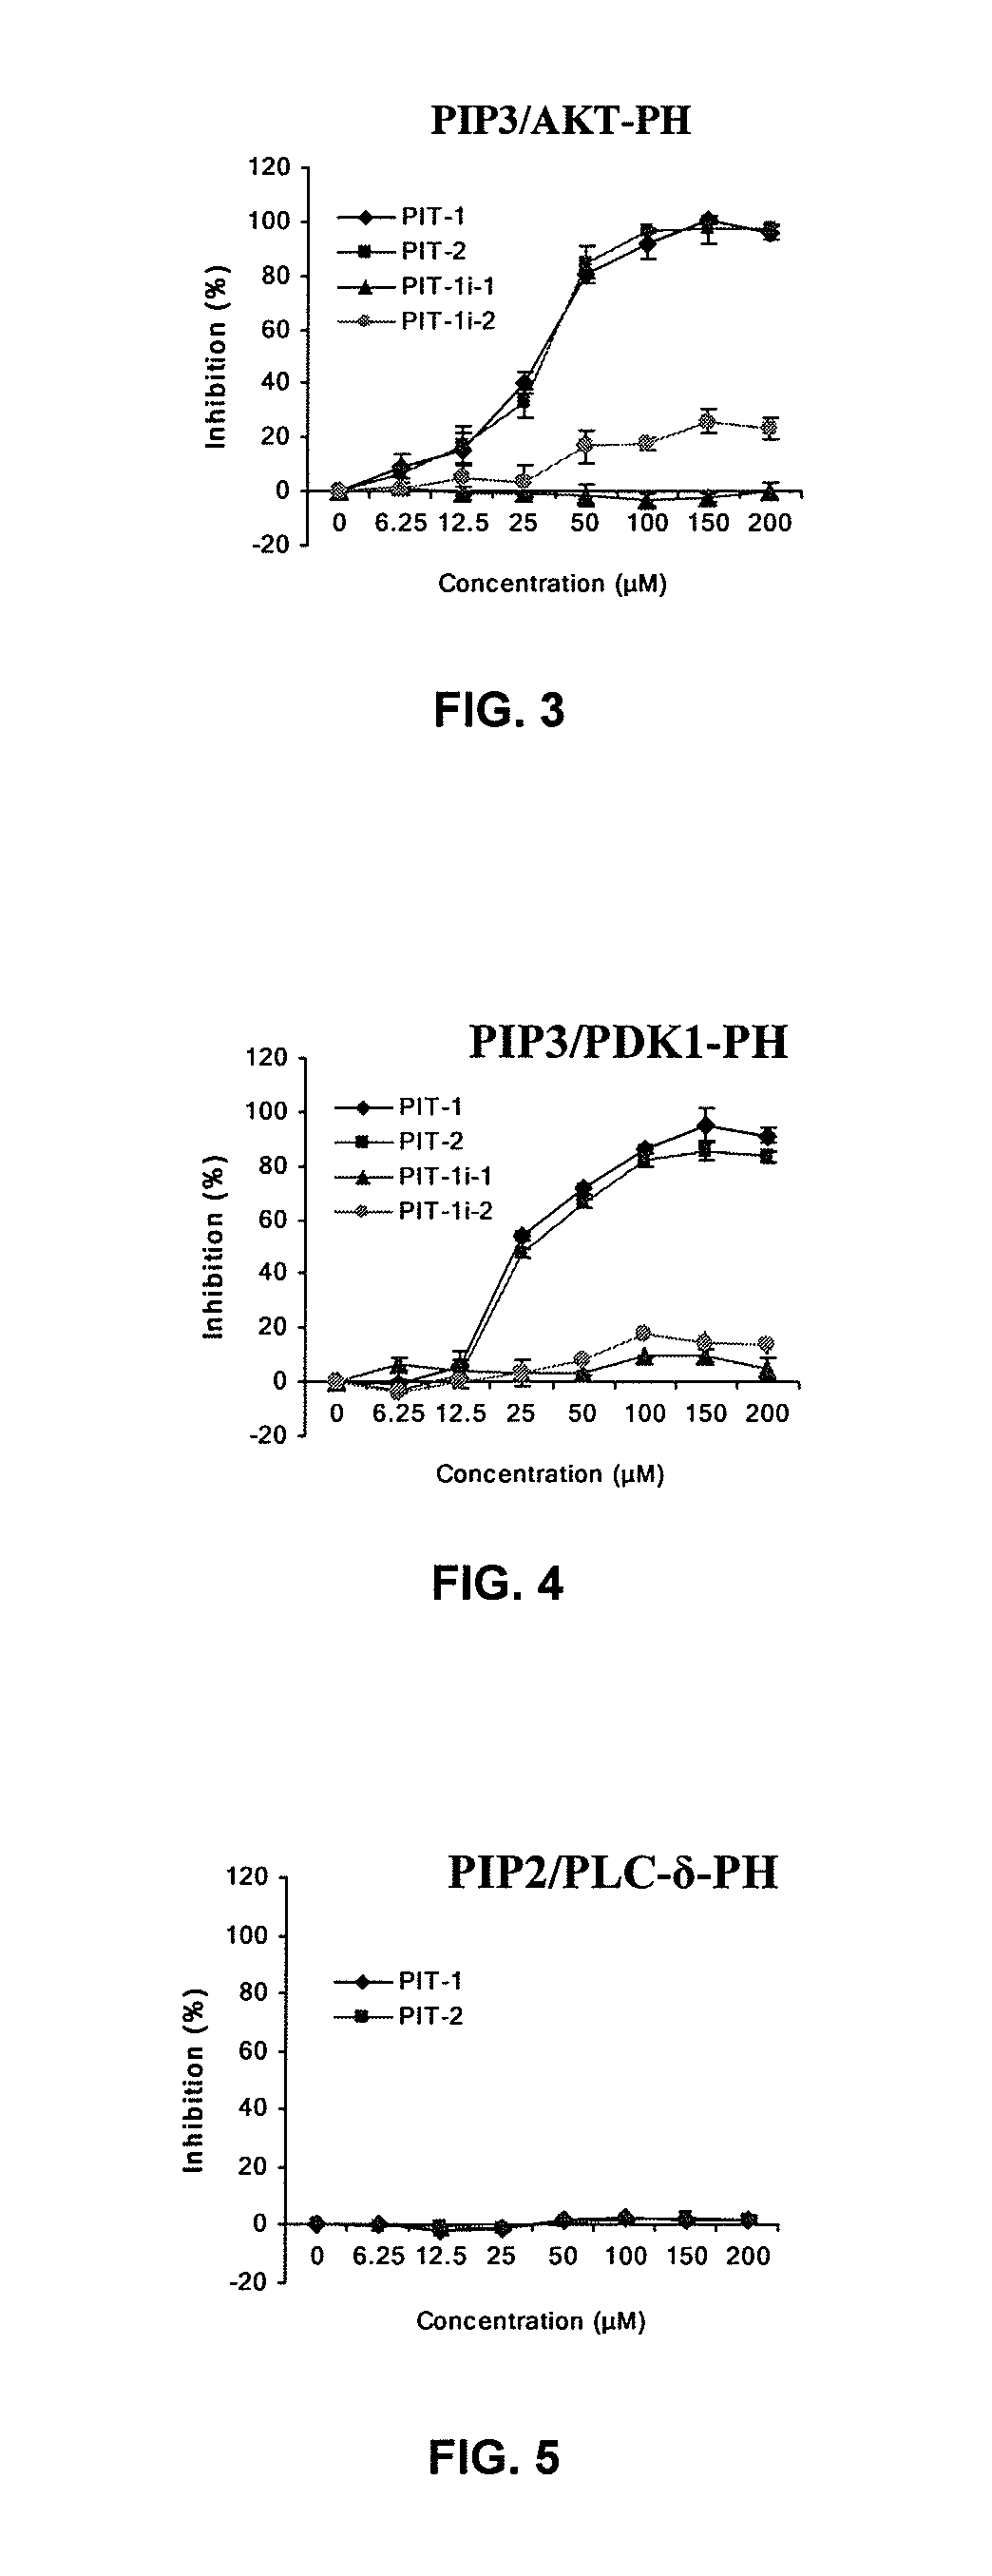 Small Molecule Antagonists of Phosphatidylinositol-3,4,5-Triphosphate (PIP3) and Uses Thereof